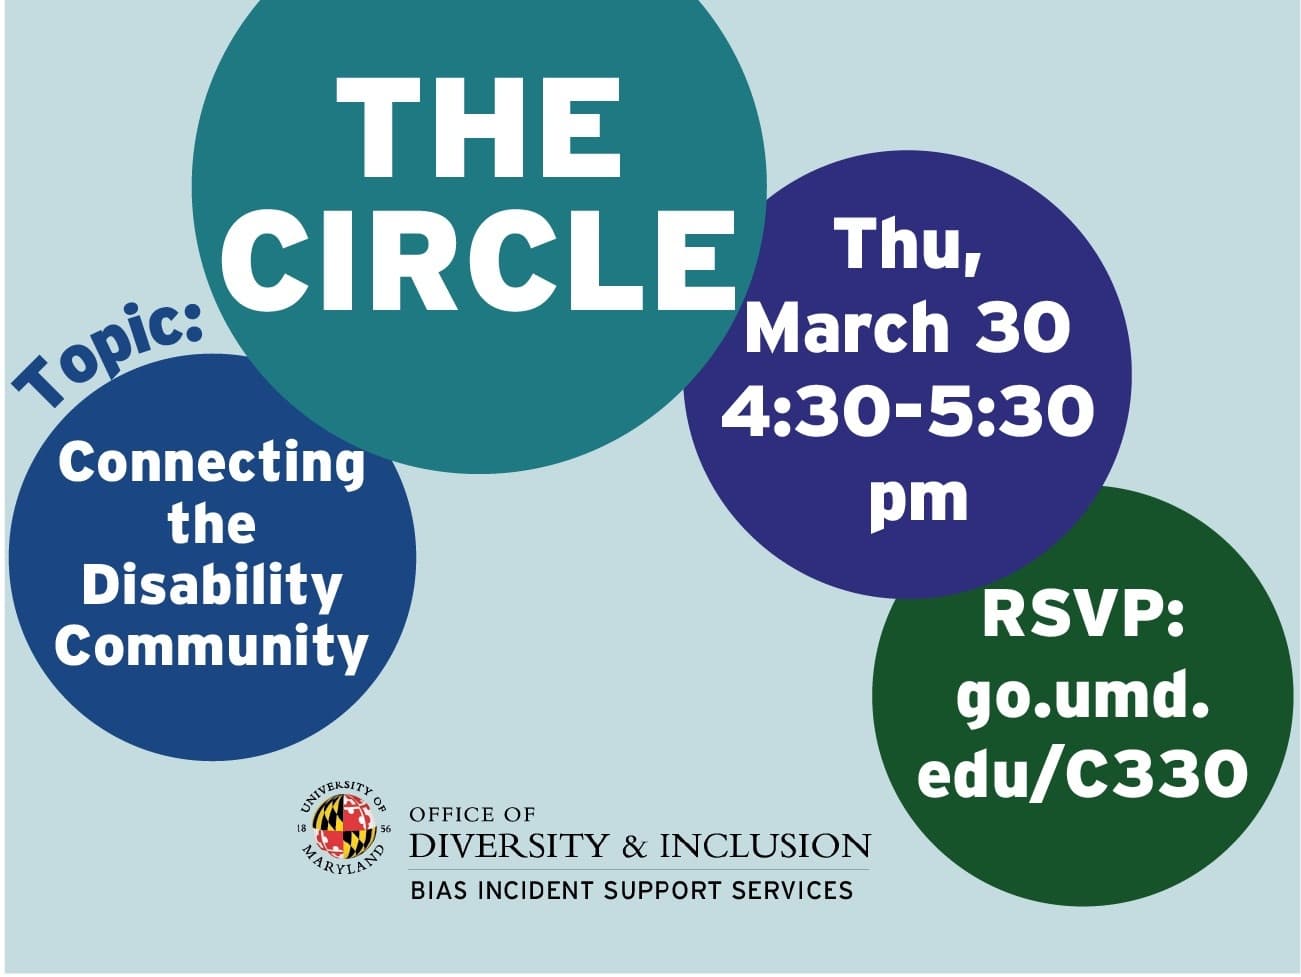 Flyer for The Circle: Connecting the Disability Community with event details in an overlapping circle design